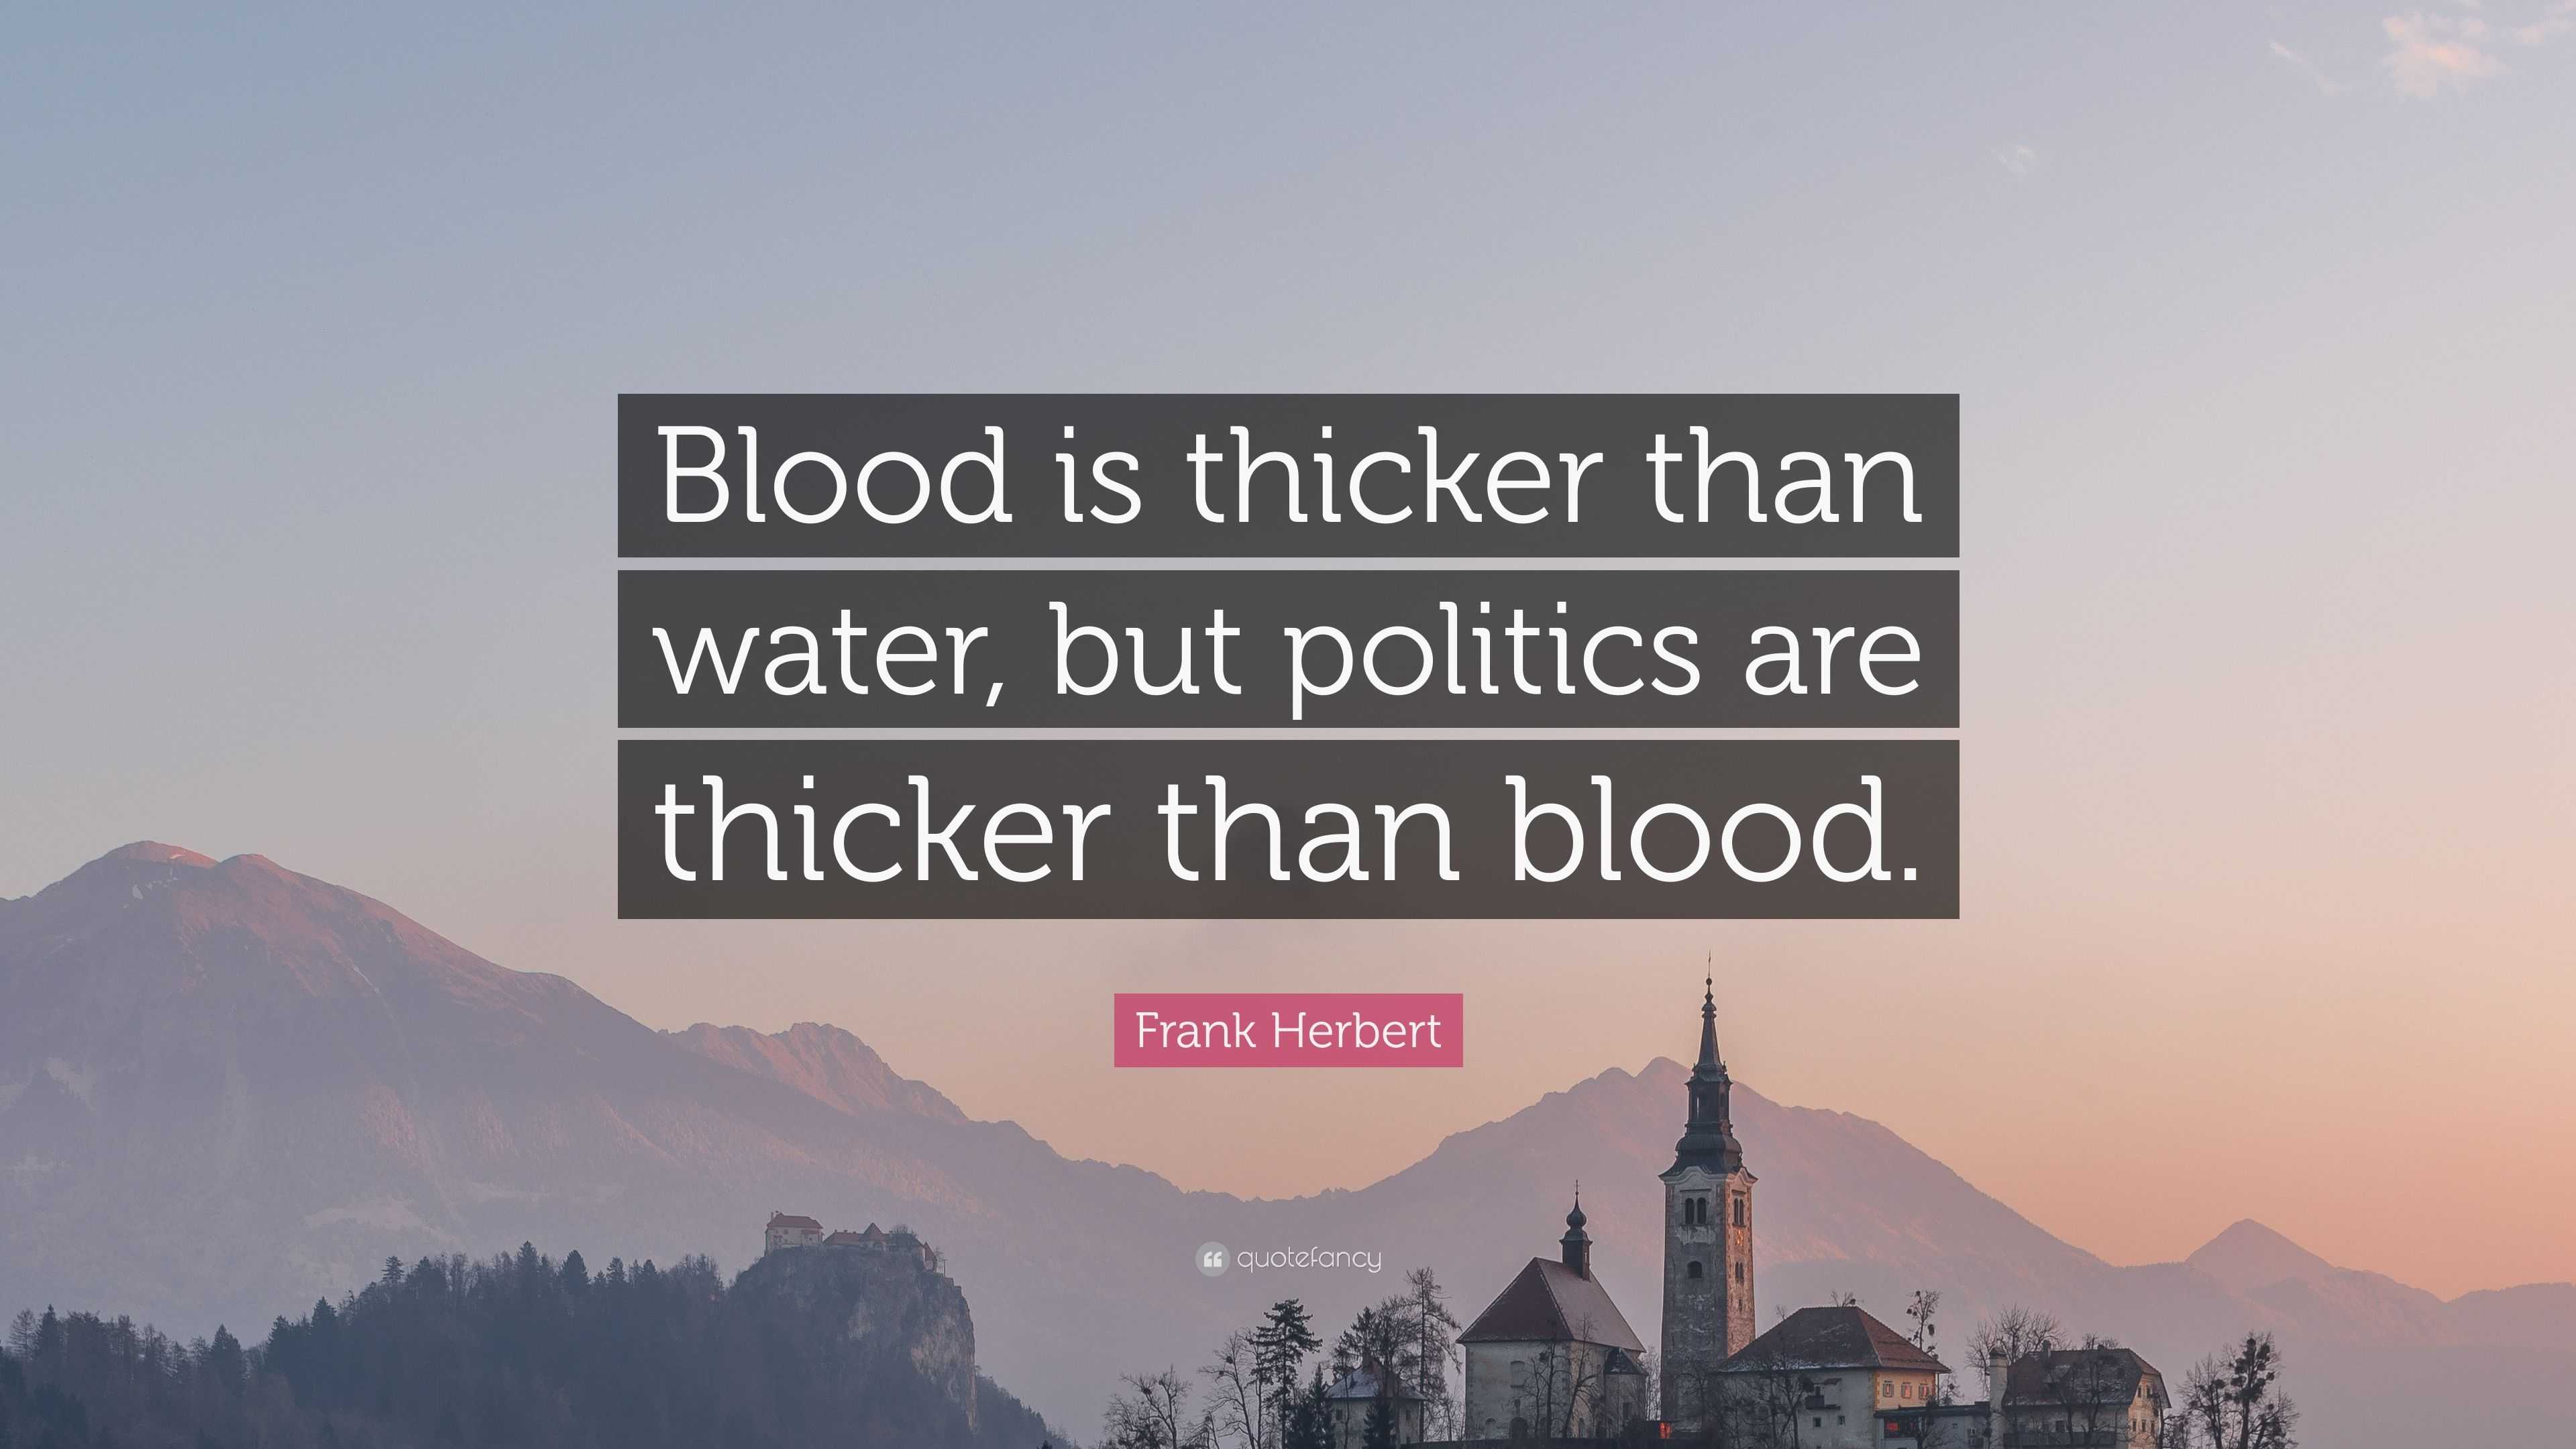 narrative essay on blood is thicker than water